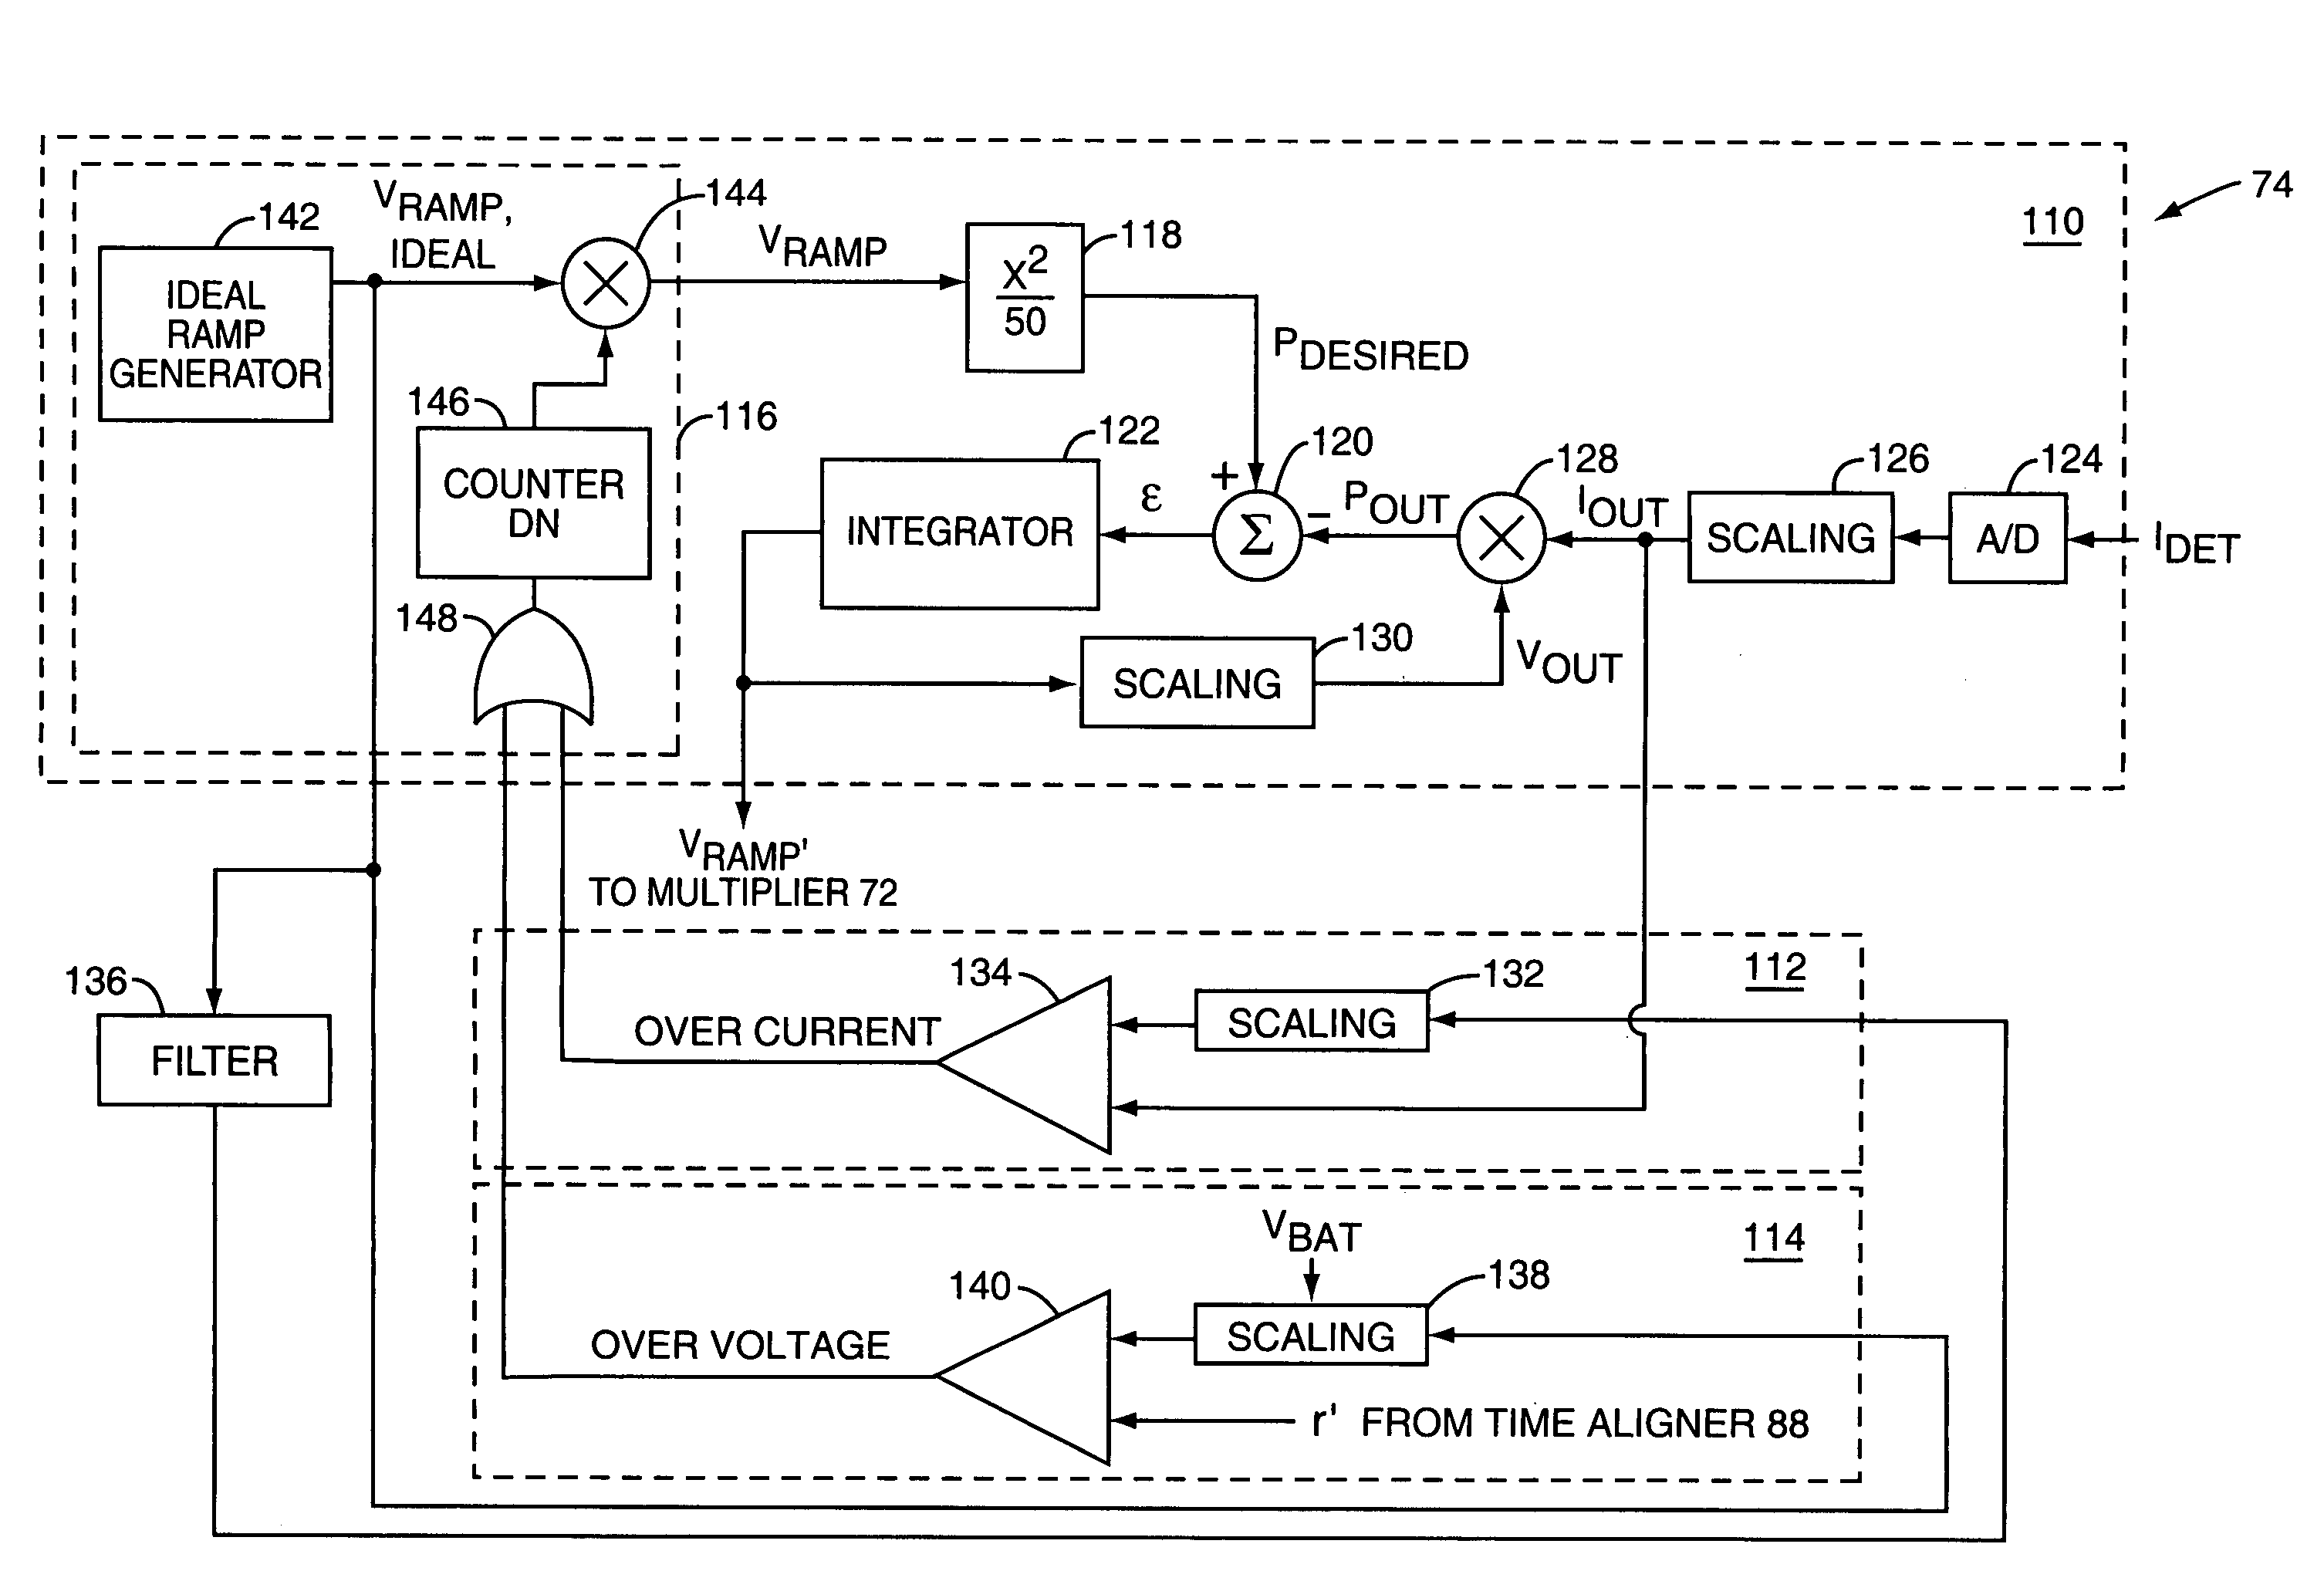 Excess current and saturation detection and correction in a power amplifier